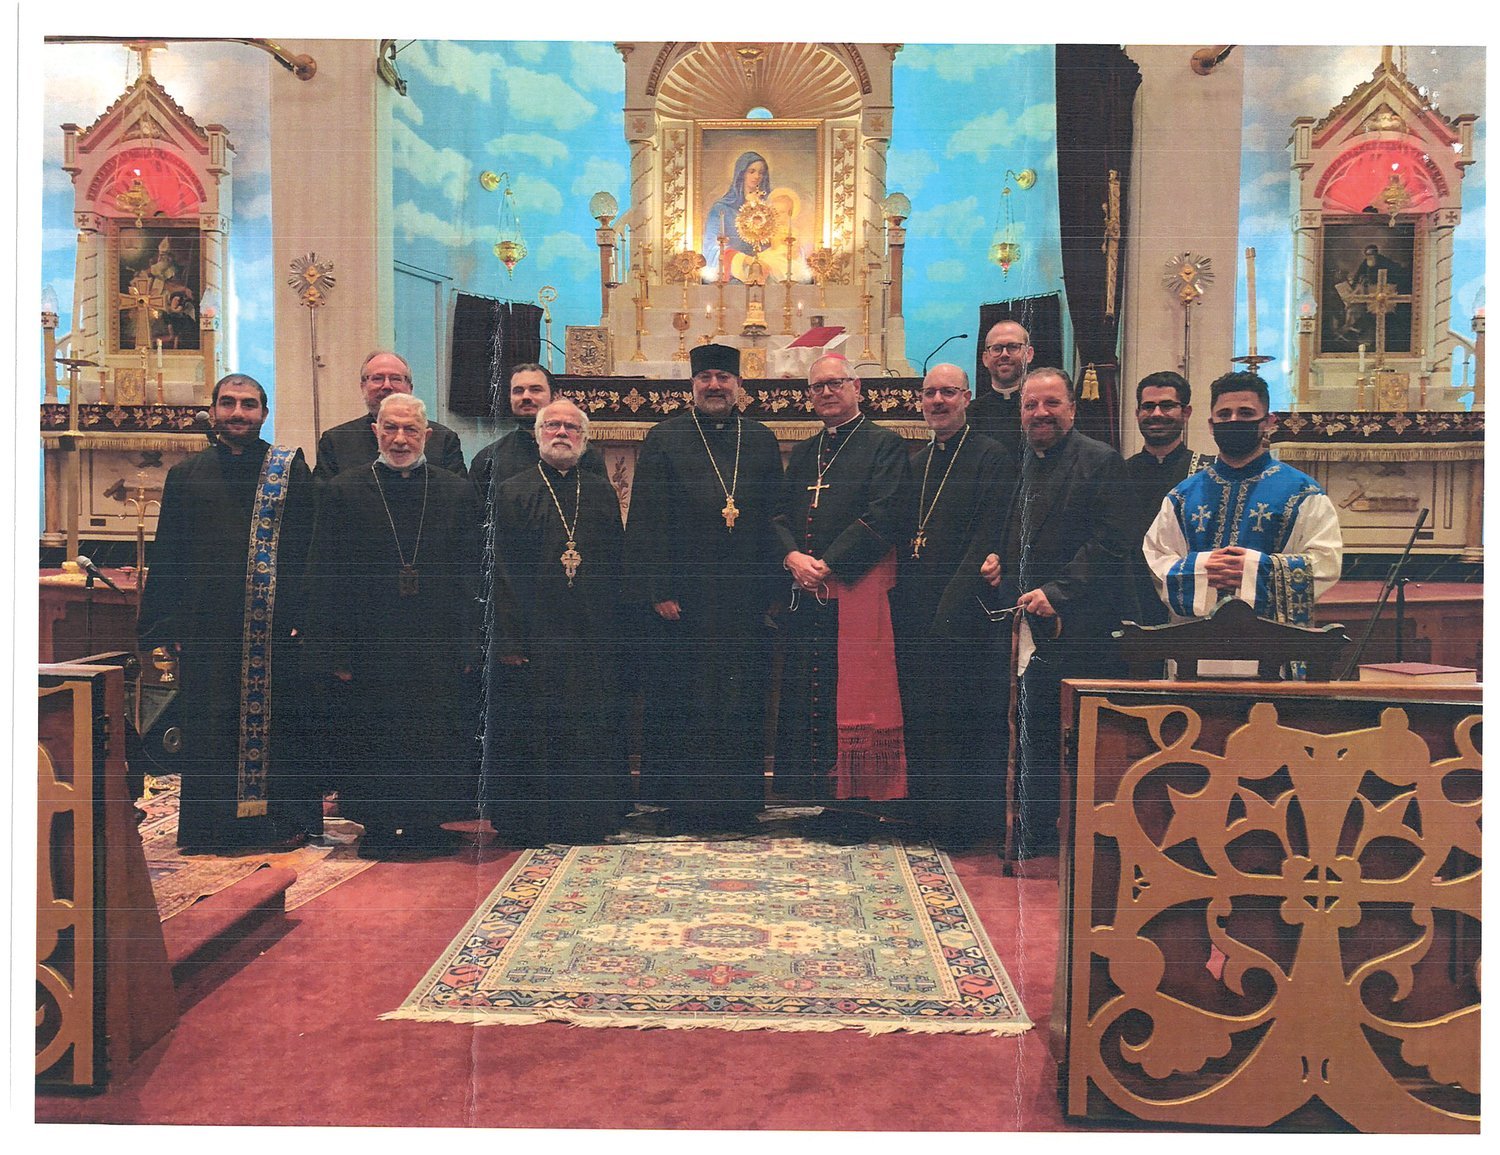 Pictured above, from left: Deacon Megrdichian, Father Joseph Santos, Father Nerses Jebejian, Father Nick Lanzourakis, Father Andrew George, Father Shnork Souin, Bishop Thomas J. Tobin, Father Kapriel Nazarian, Father Adam Young, Rev. Hagop Manjelikian, Deacon Michael Sabounjian, SDn. Aren Dawood. The participants wore masks for the service, removing them briefly for the photo.